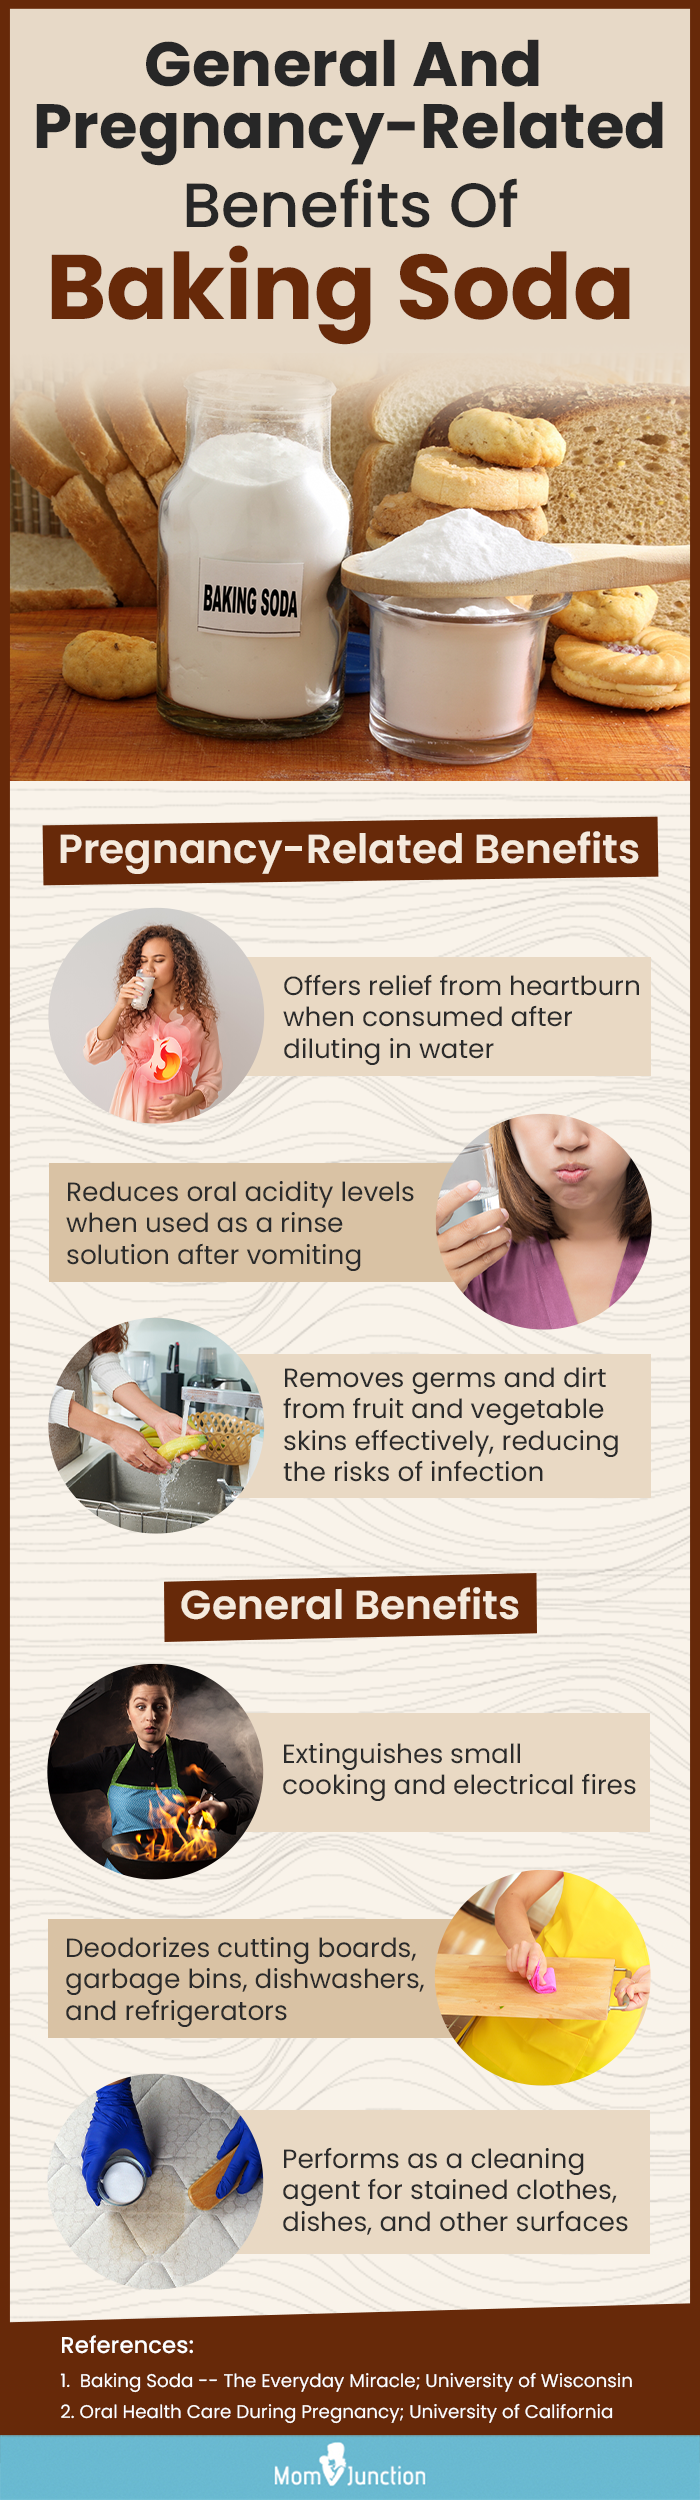 general and pregnancy related benefits of baking soda (infographic)